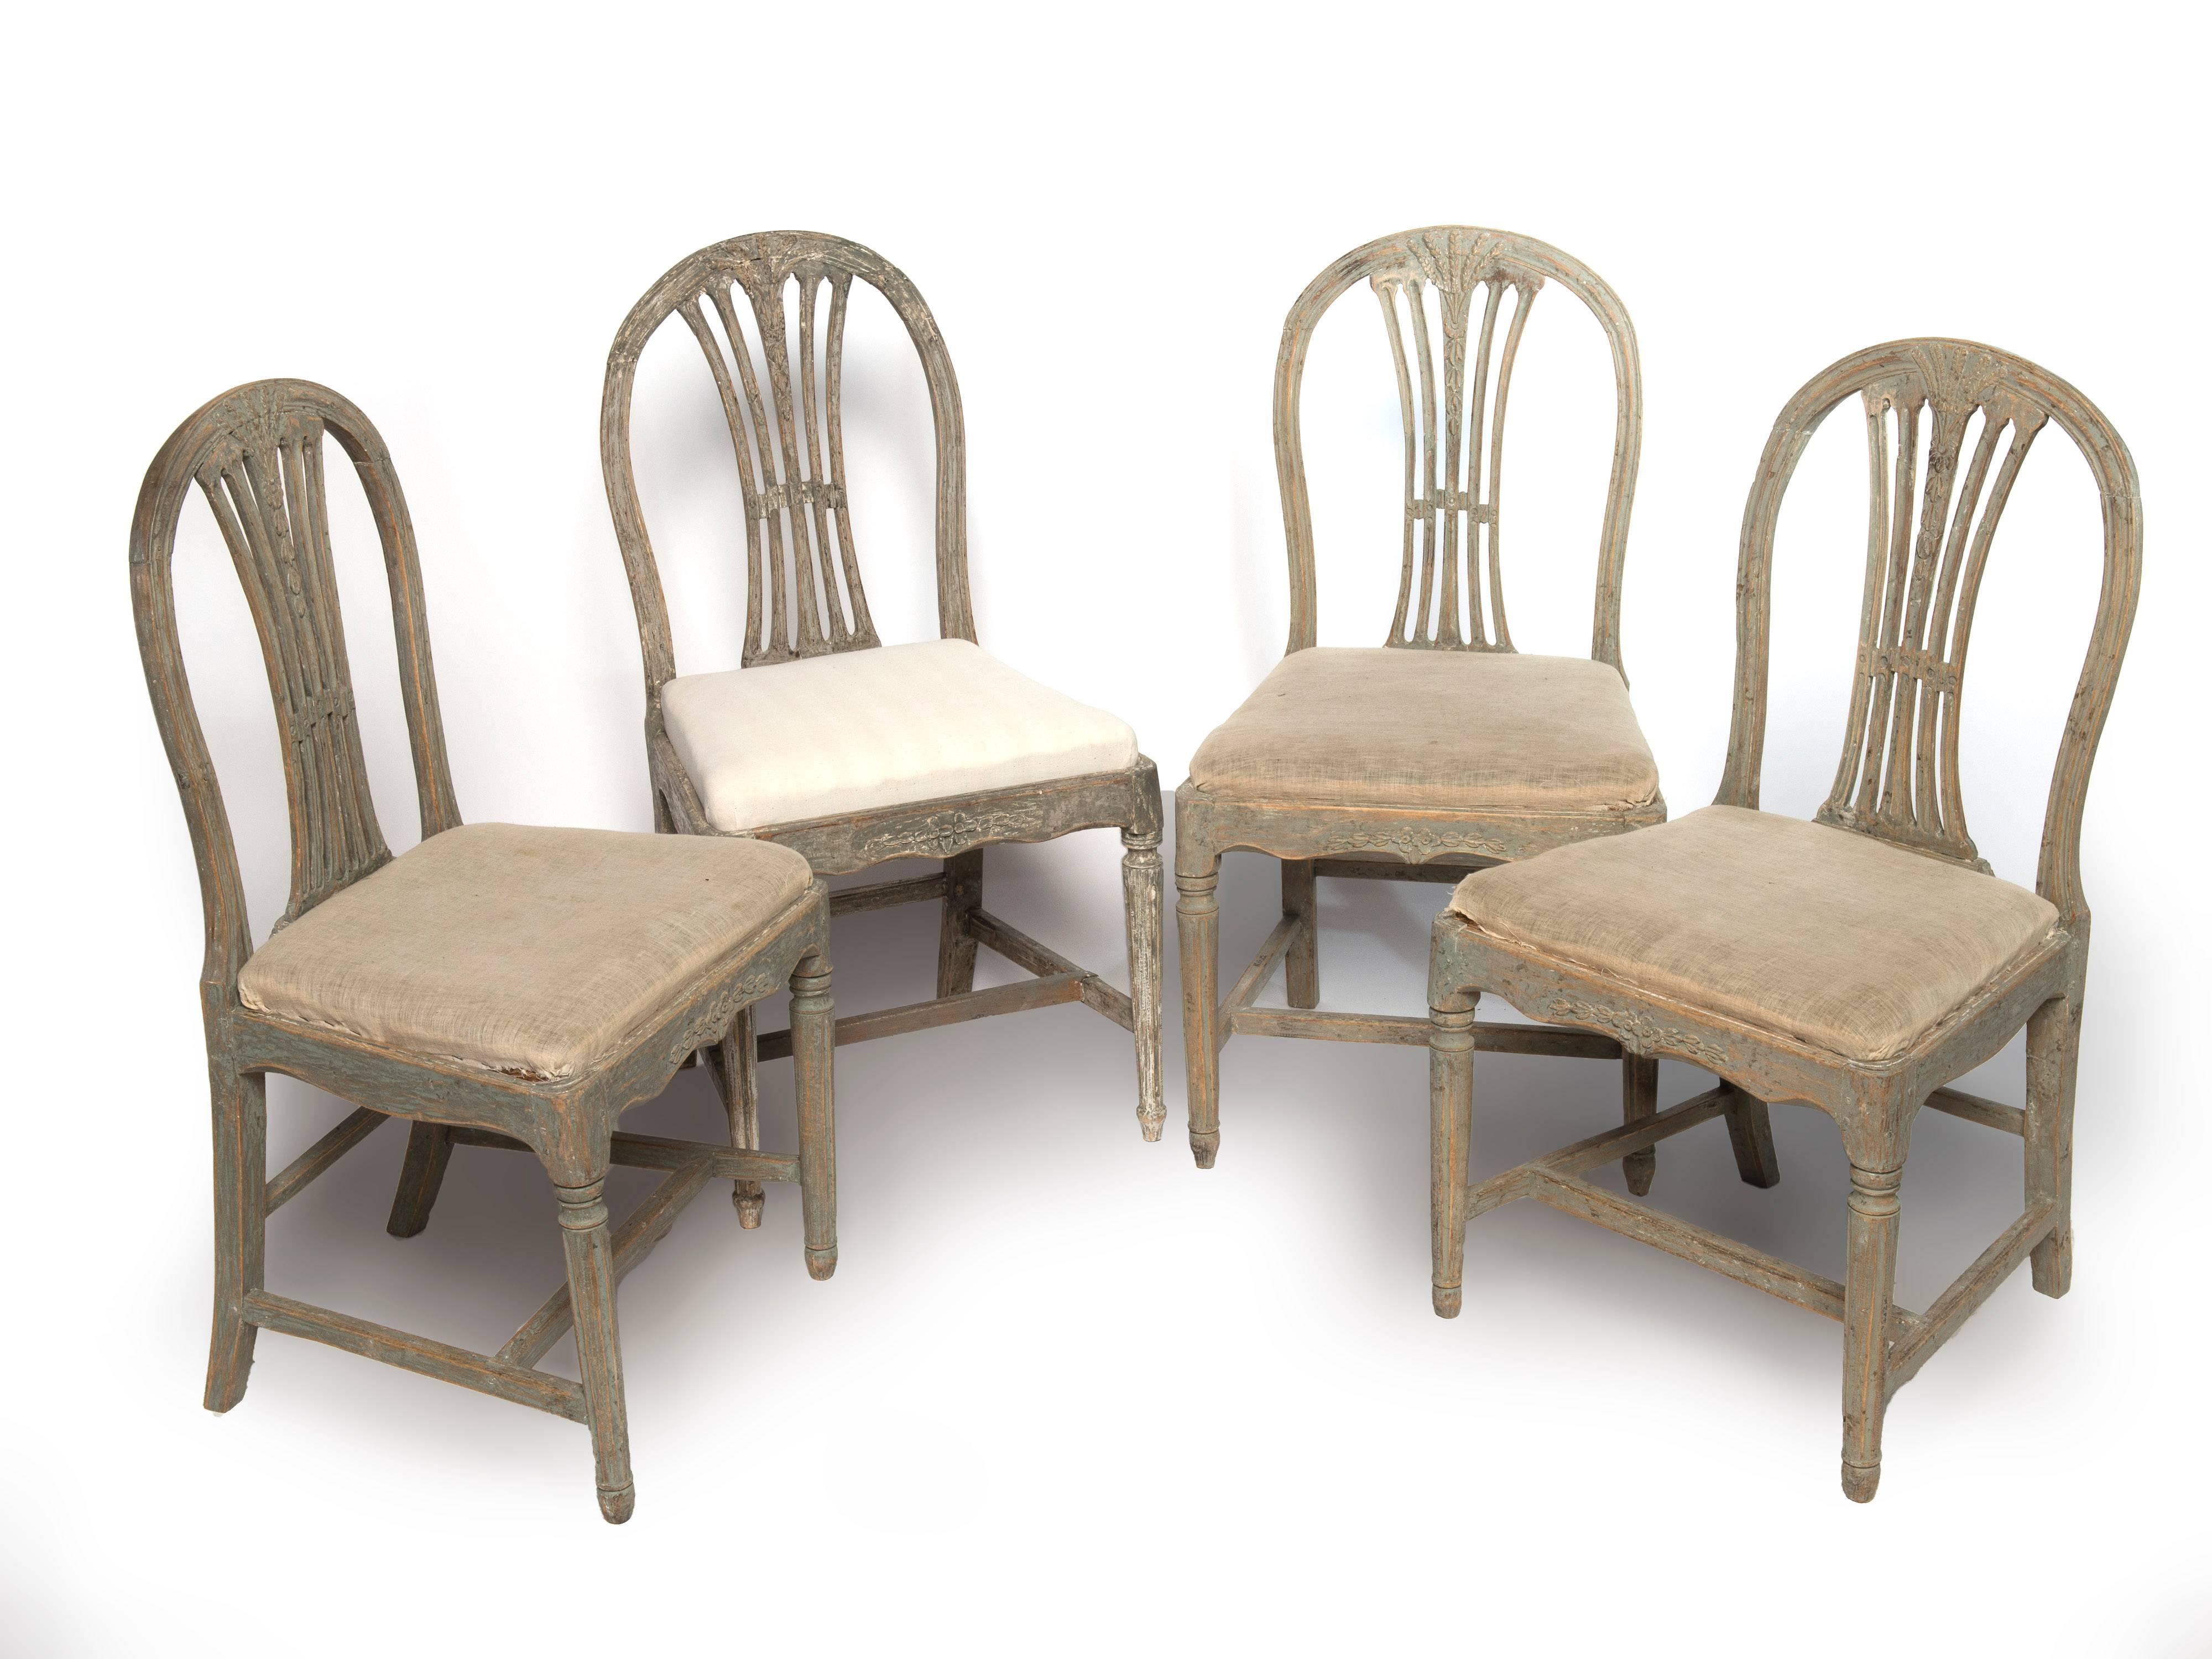 Matched set of four Gustavian dining chairs. We also have a set of six that can be combined with this set. The seats are covered in original muslin.